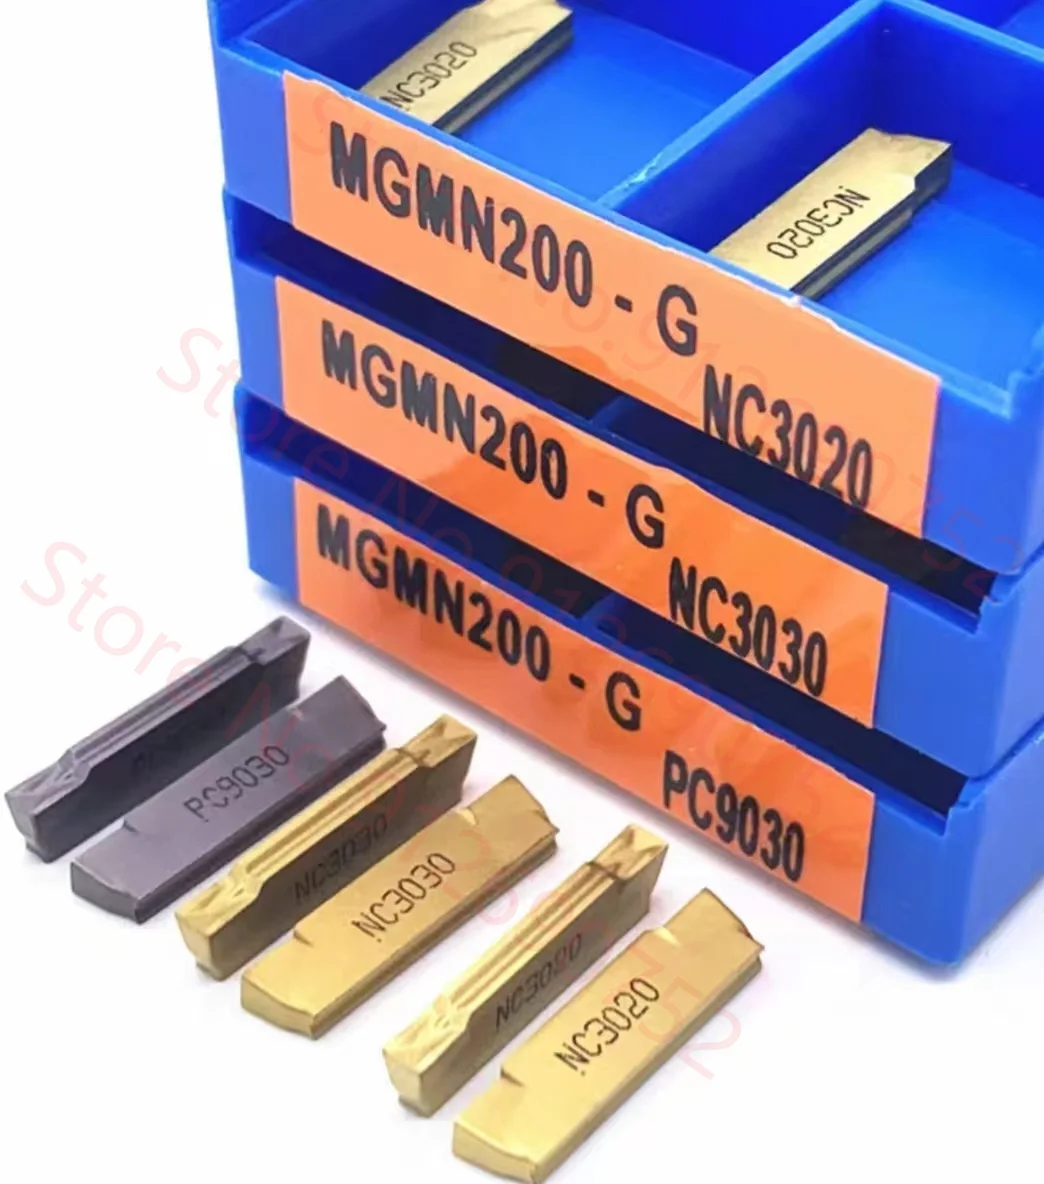 

MGMN150 MGMN200 MGMN250 MGMN300 MGMN400 MGMN500 G NC3020 3030 PC9030 grooving carbide inserts Parting and grooving tool